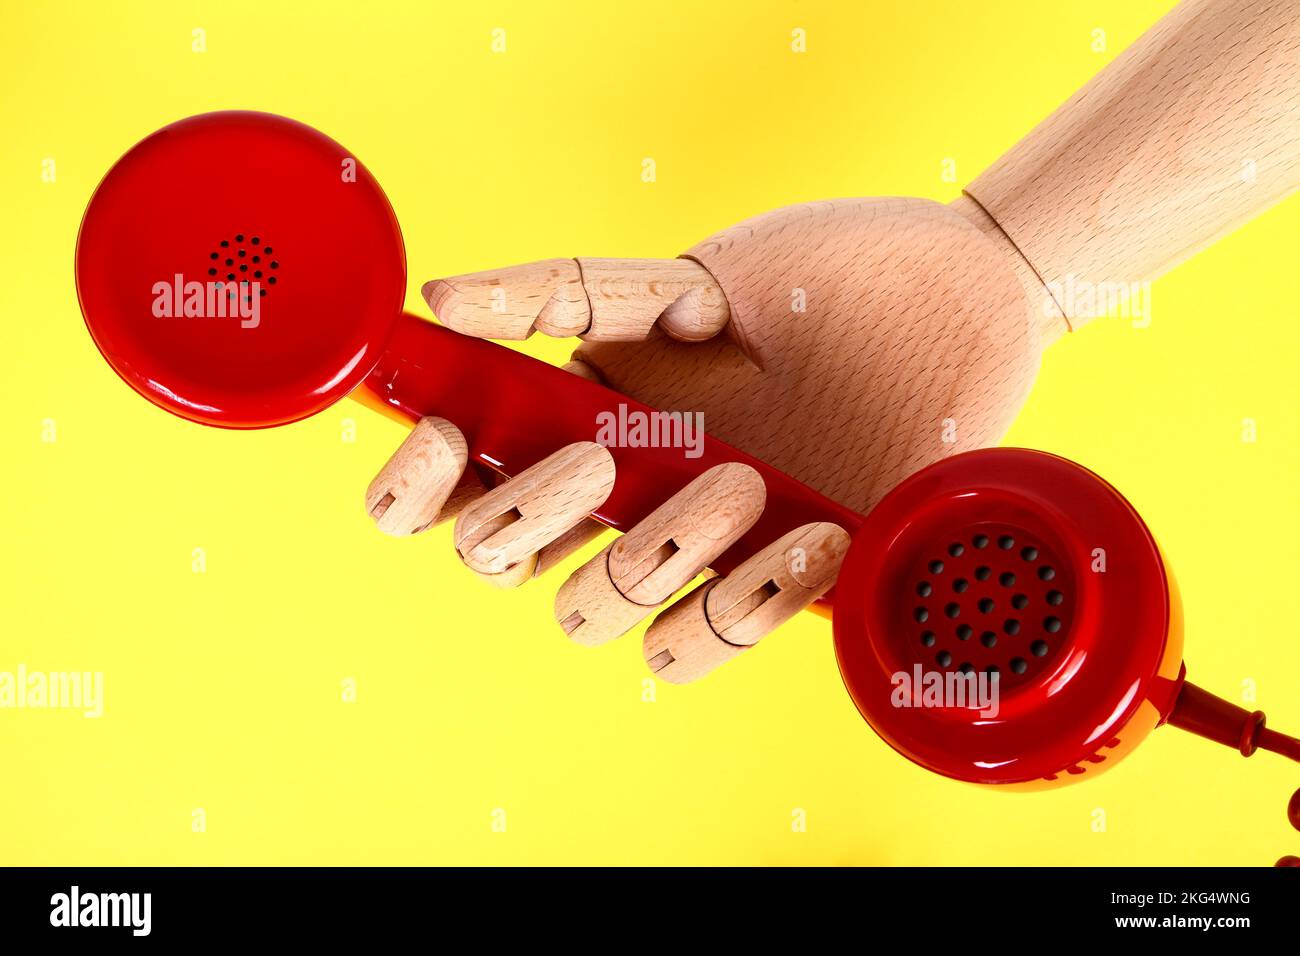 Wooden hand holding a red old fashioned retro telephone handset Stock Photo